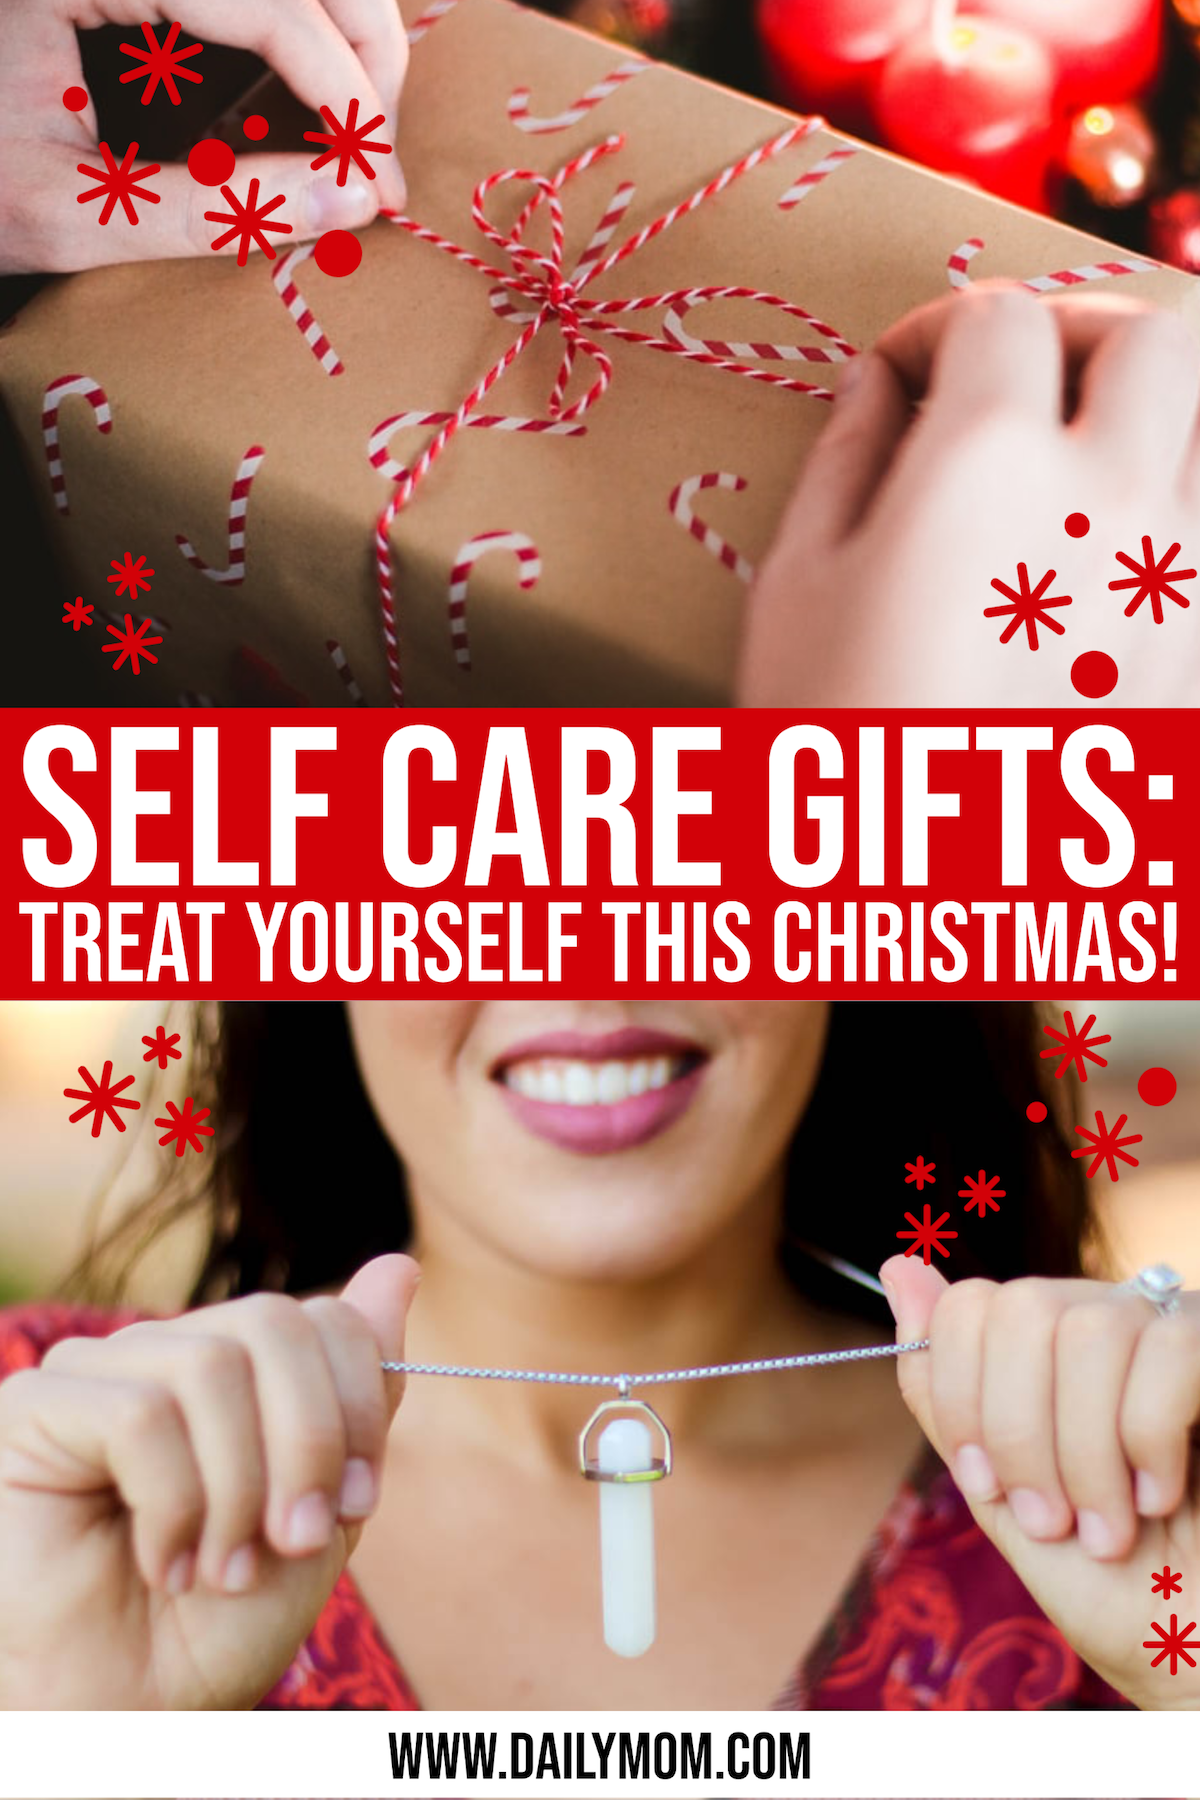 22 Wonderful Self Care Gifts This Christmas: Treat Yourself!